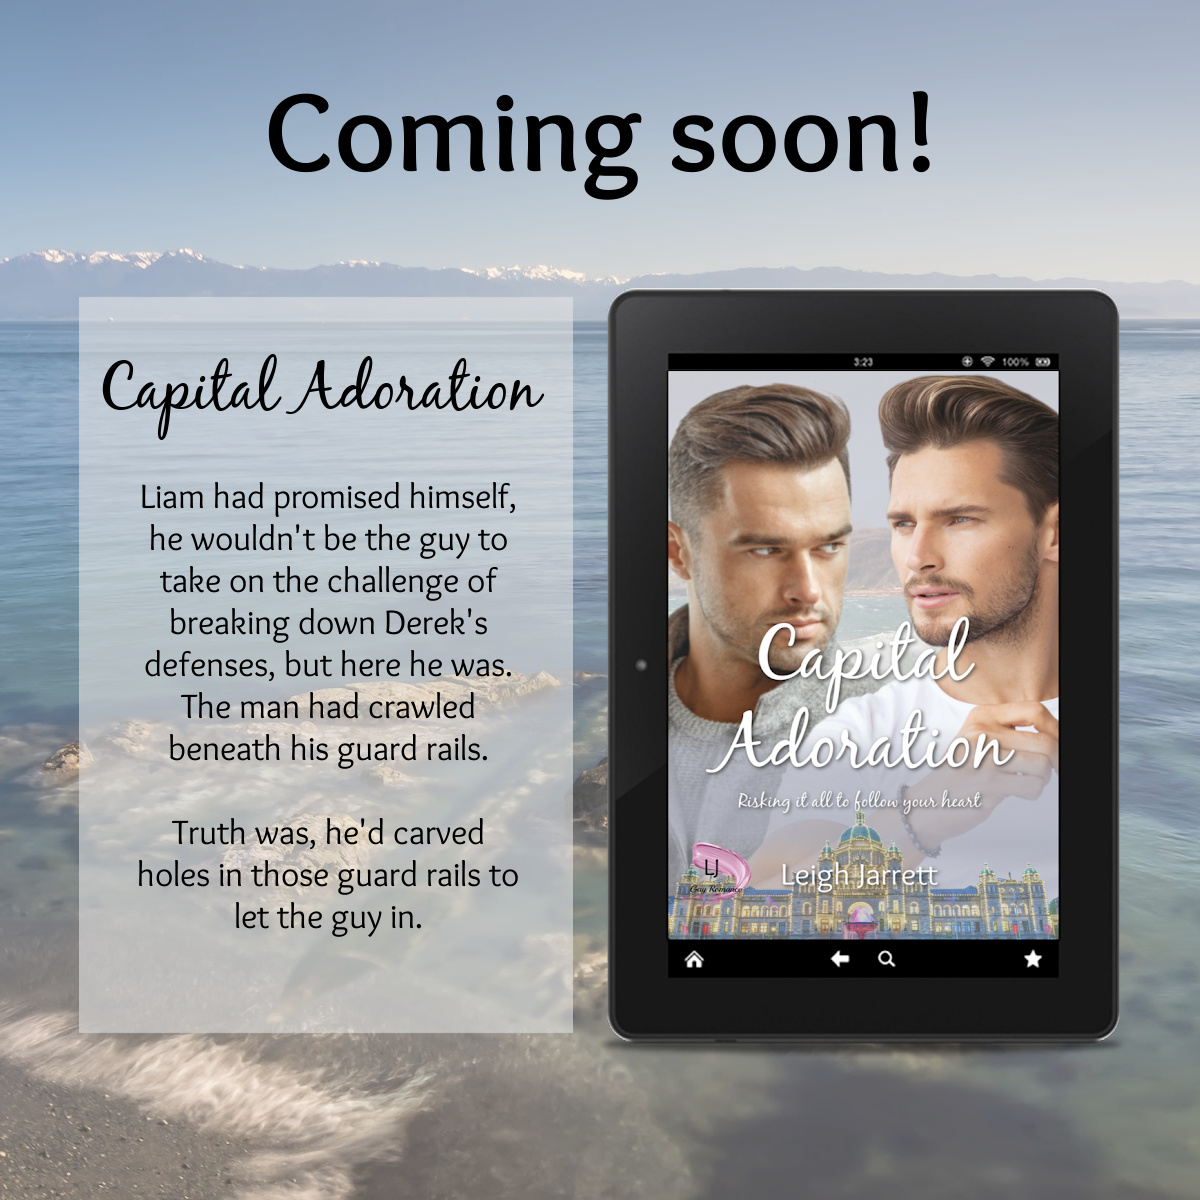 Capital Adoration - Coming Soon!

Liam had promised himself, he wouldn't be the guy to take on the challenge of breaking down Derek's defenses, but here he was. The man had crawled beneath his guard rails.

#bisexual #bisexualromance #bisexualbook #bisexualbooks